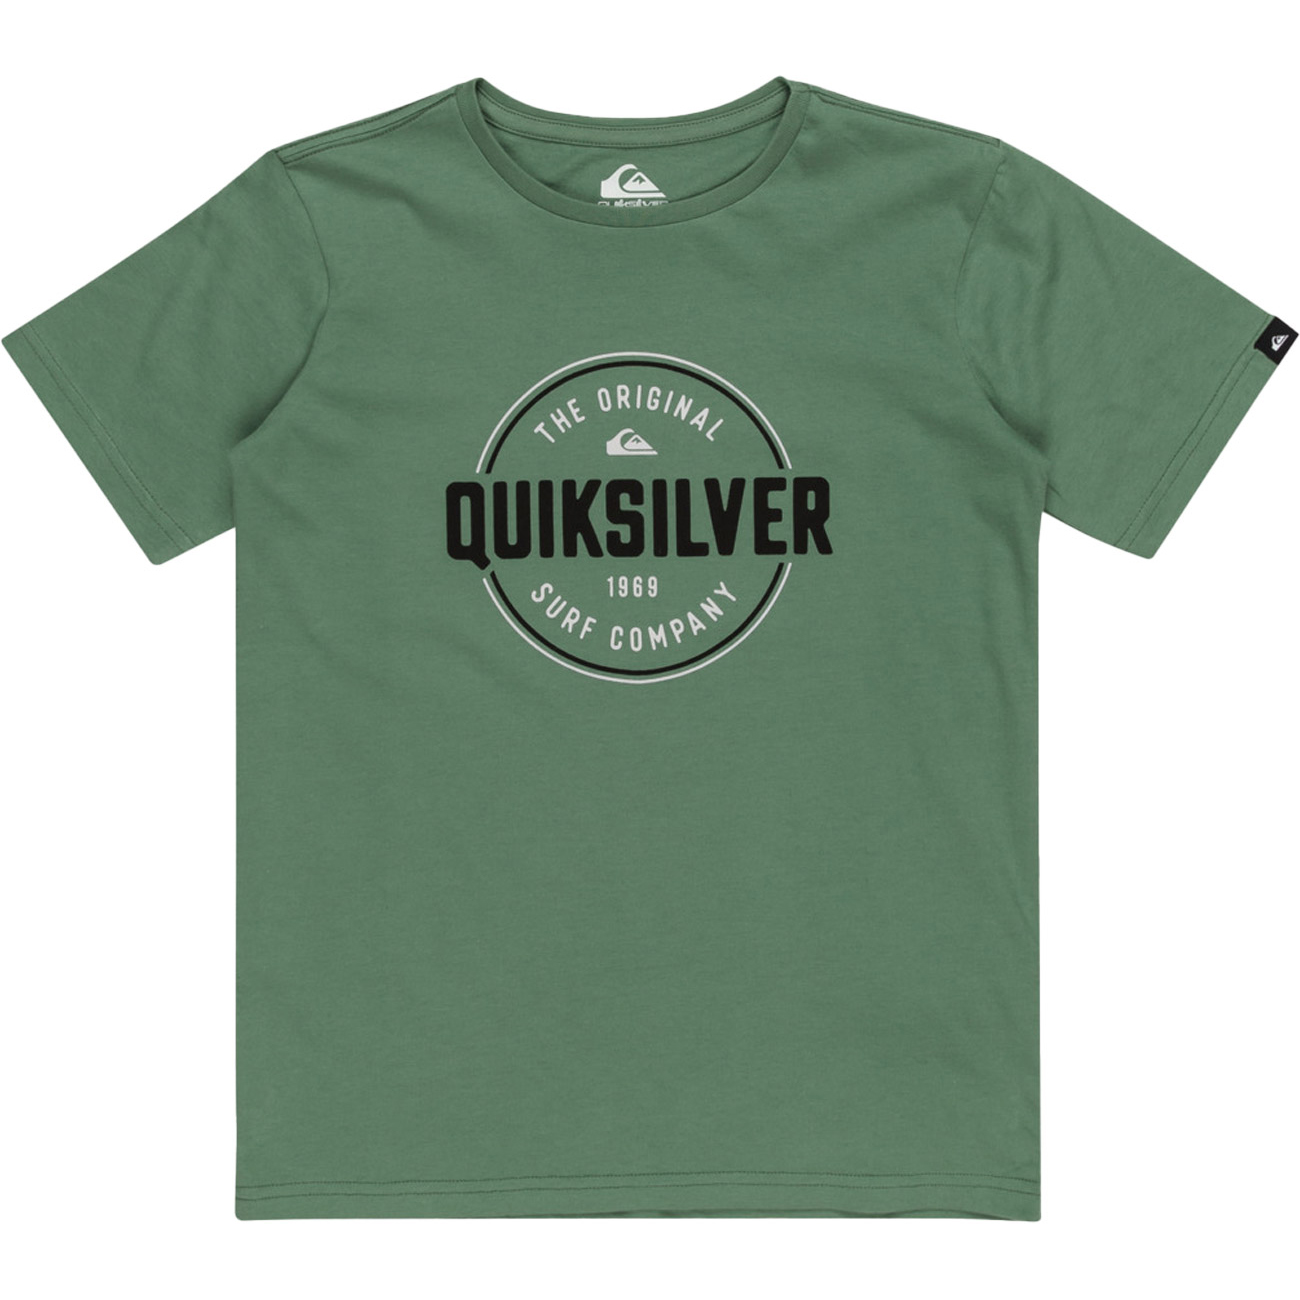 Quiksilver Kinder T-Shirt CIRCLE UP YOUTH von Quiksilver